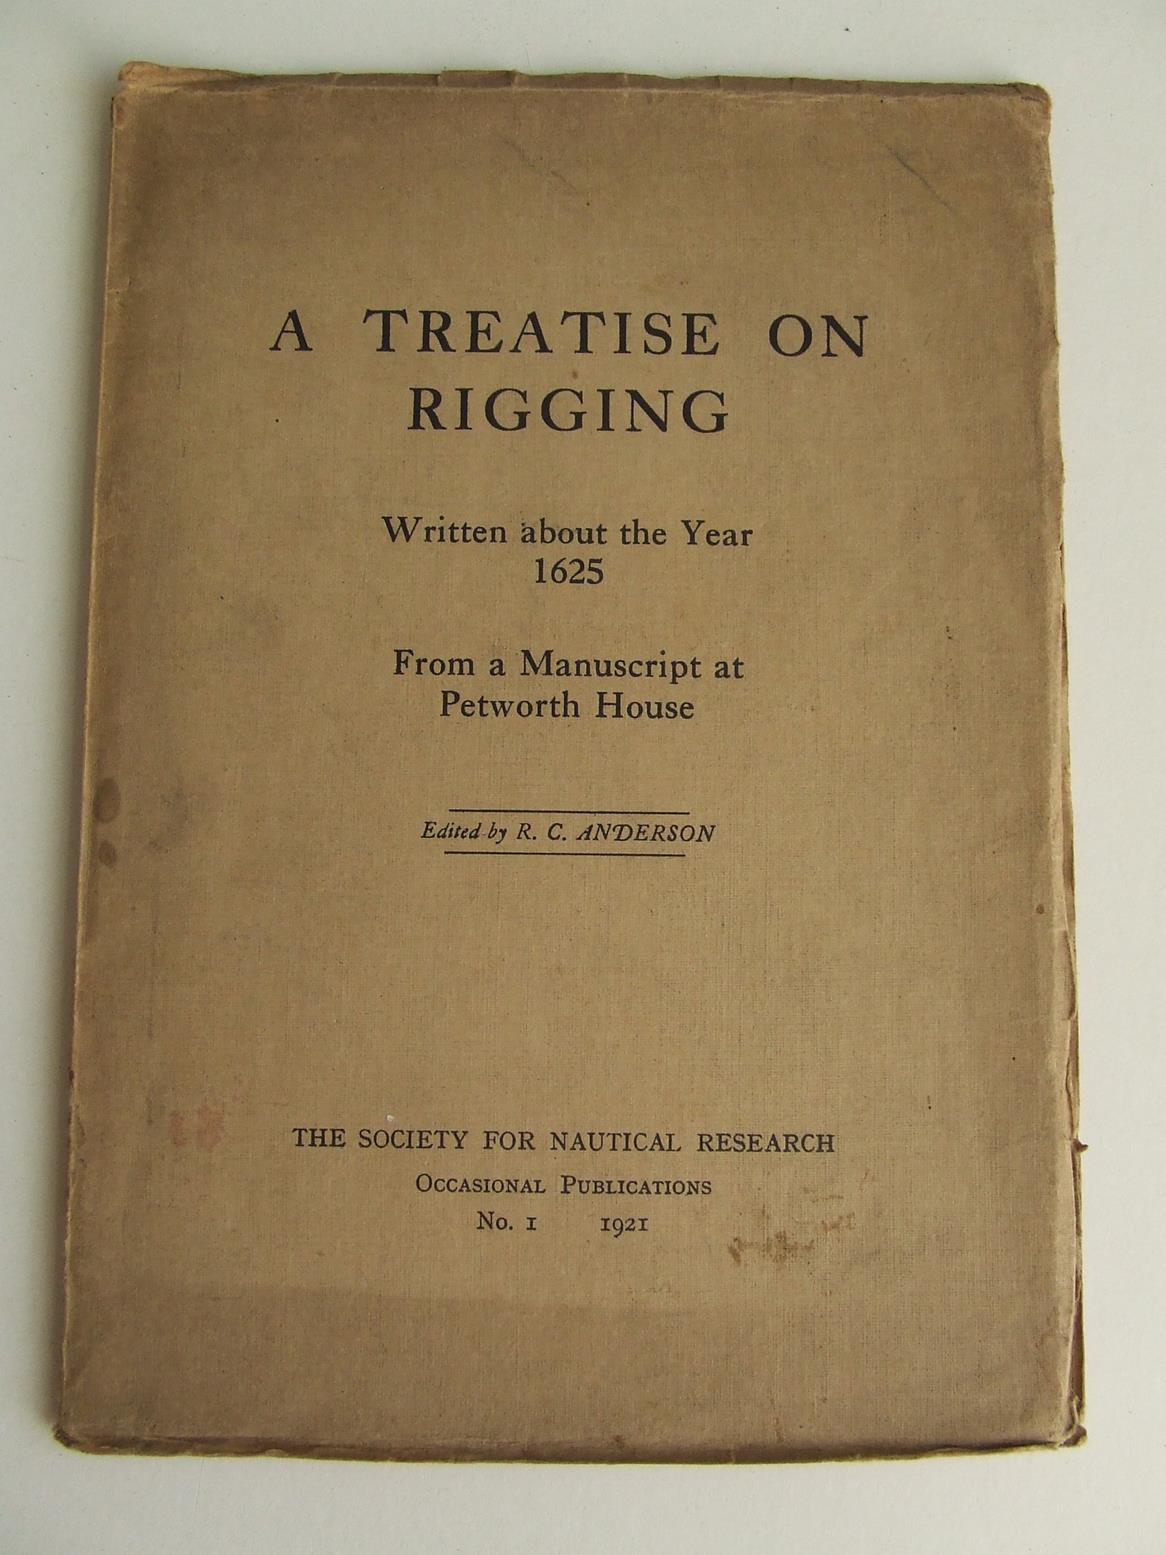 A Treatise on Rigging, written about the year 1625